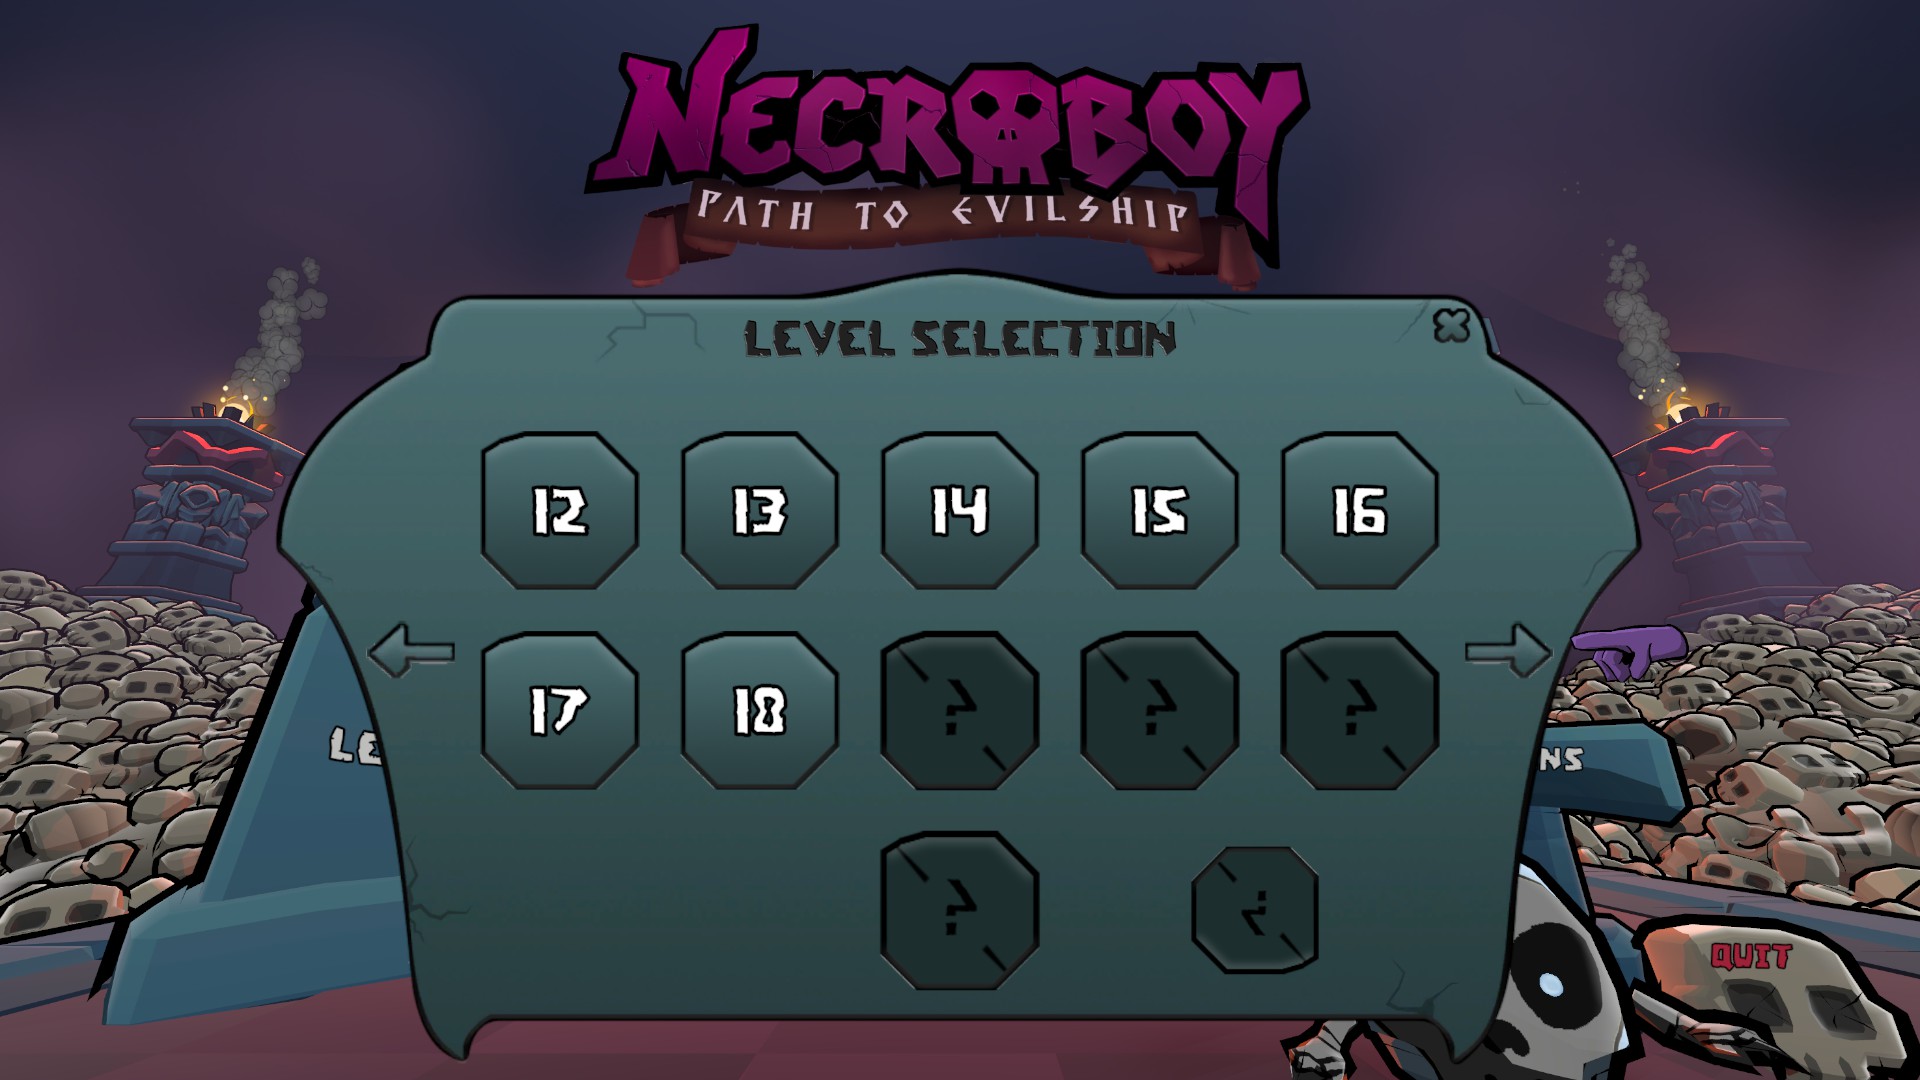 the necroboy level selection screen, showing numbers 12 to 18 but with a forward and backwards arrow.